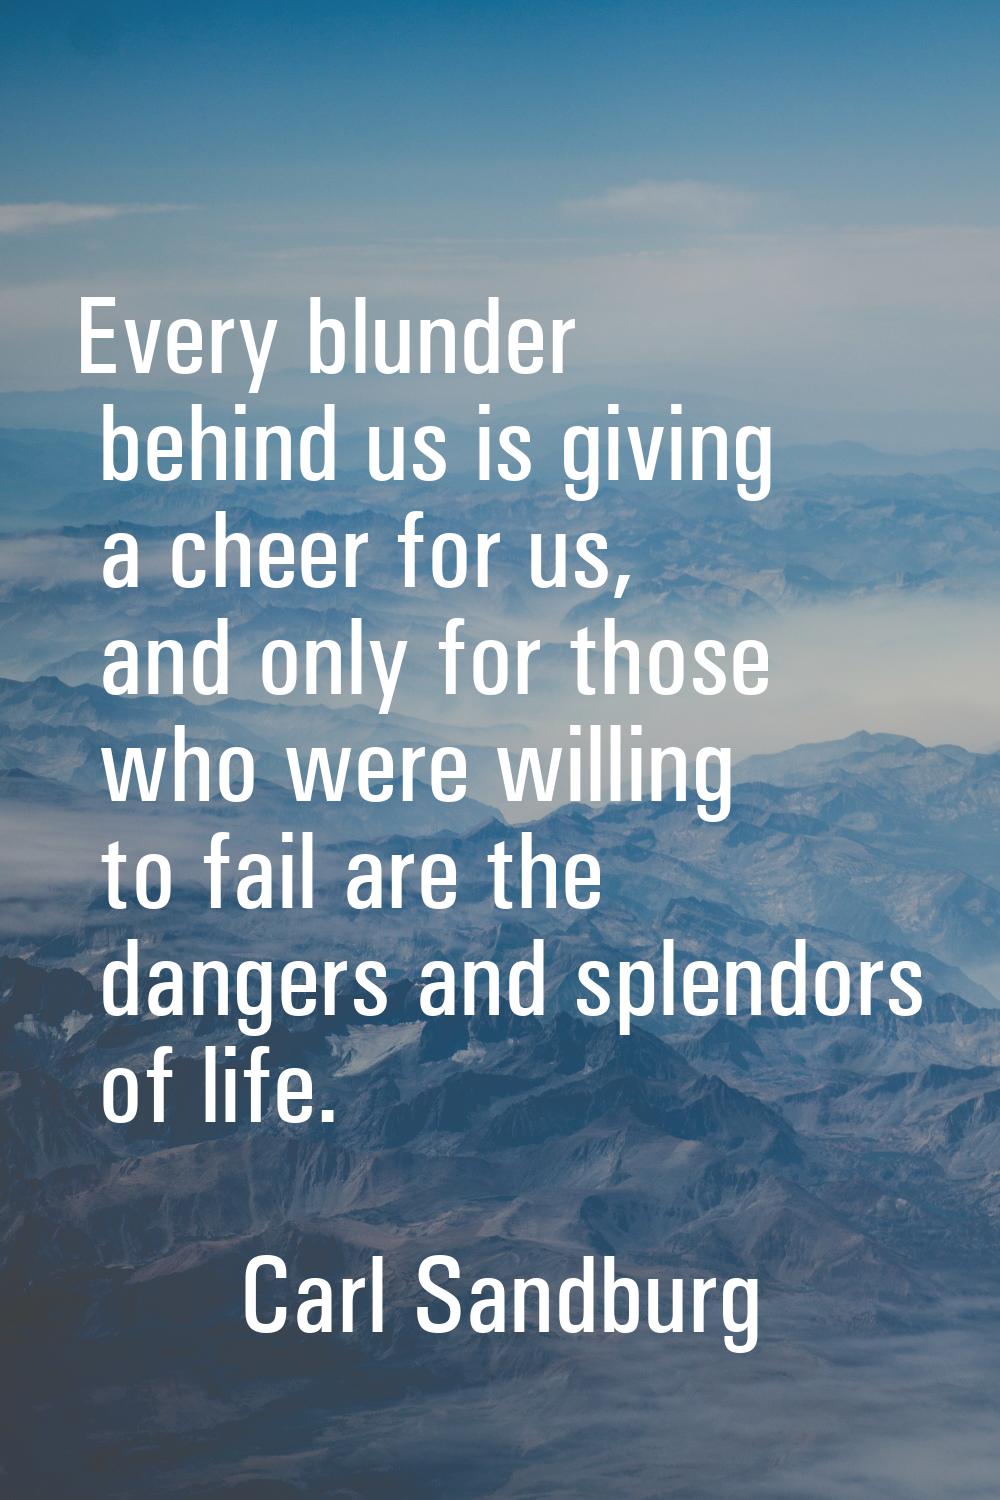 Every blunder behind us is giving a cheer for us, and only for those who were willing to fail are t